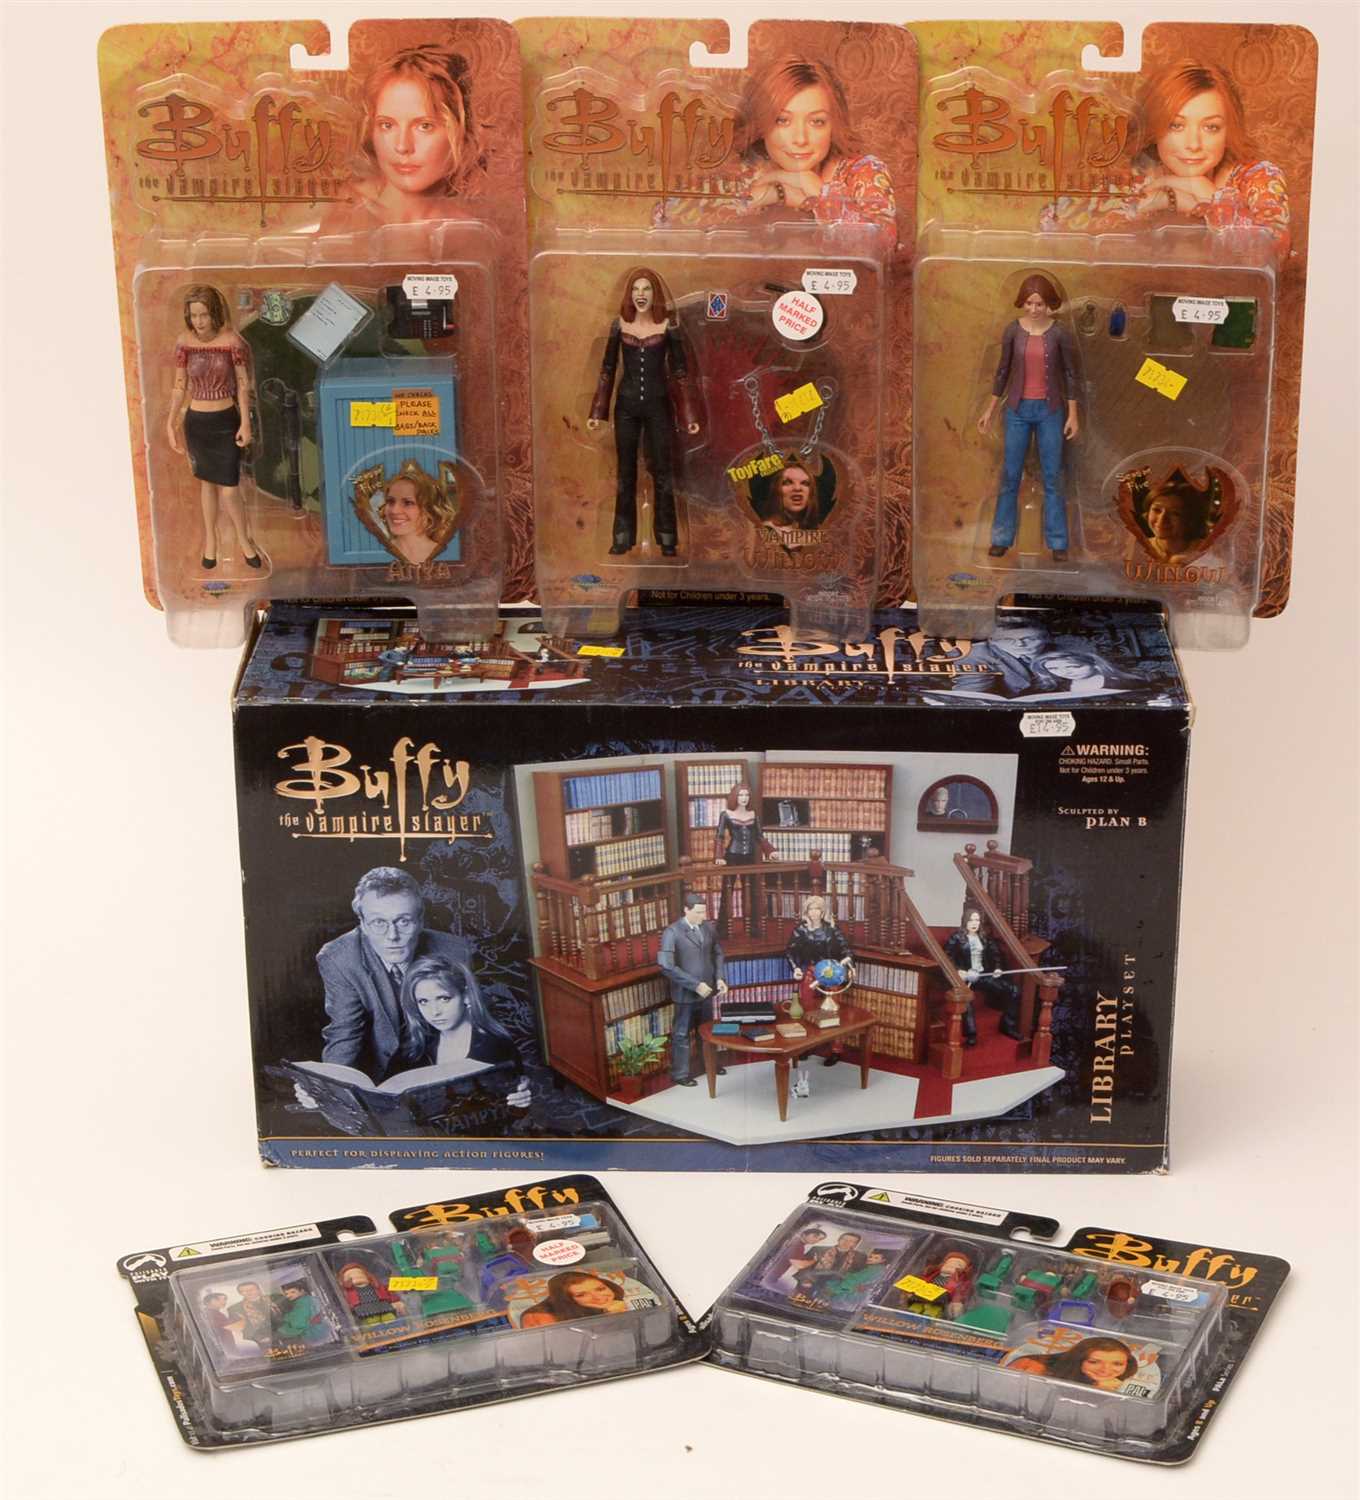 Lot 1245 - Buffy The Vampire Slayer play set and figurines.